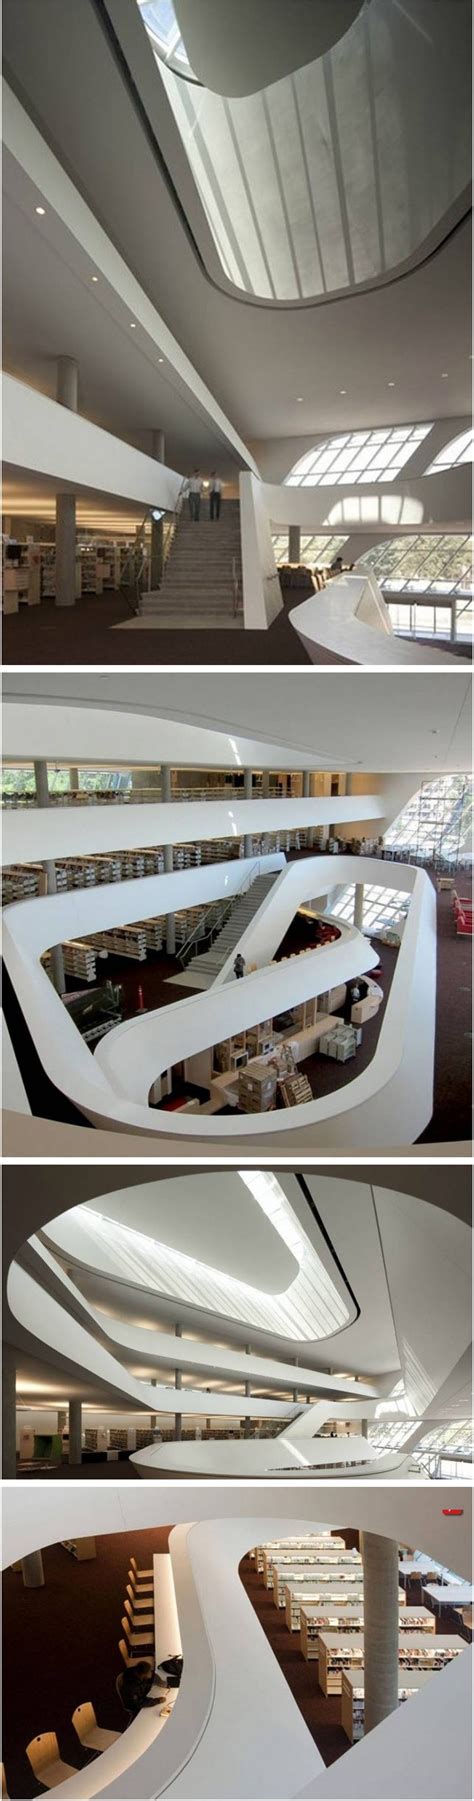 Surrey City Centre Library By Bing Thom Architects Home Libraries